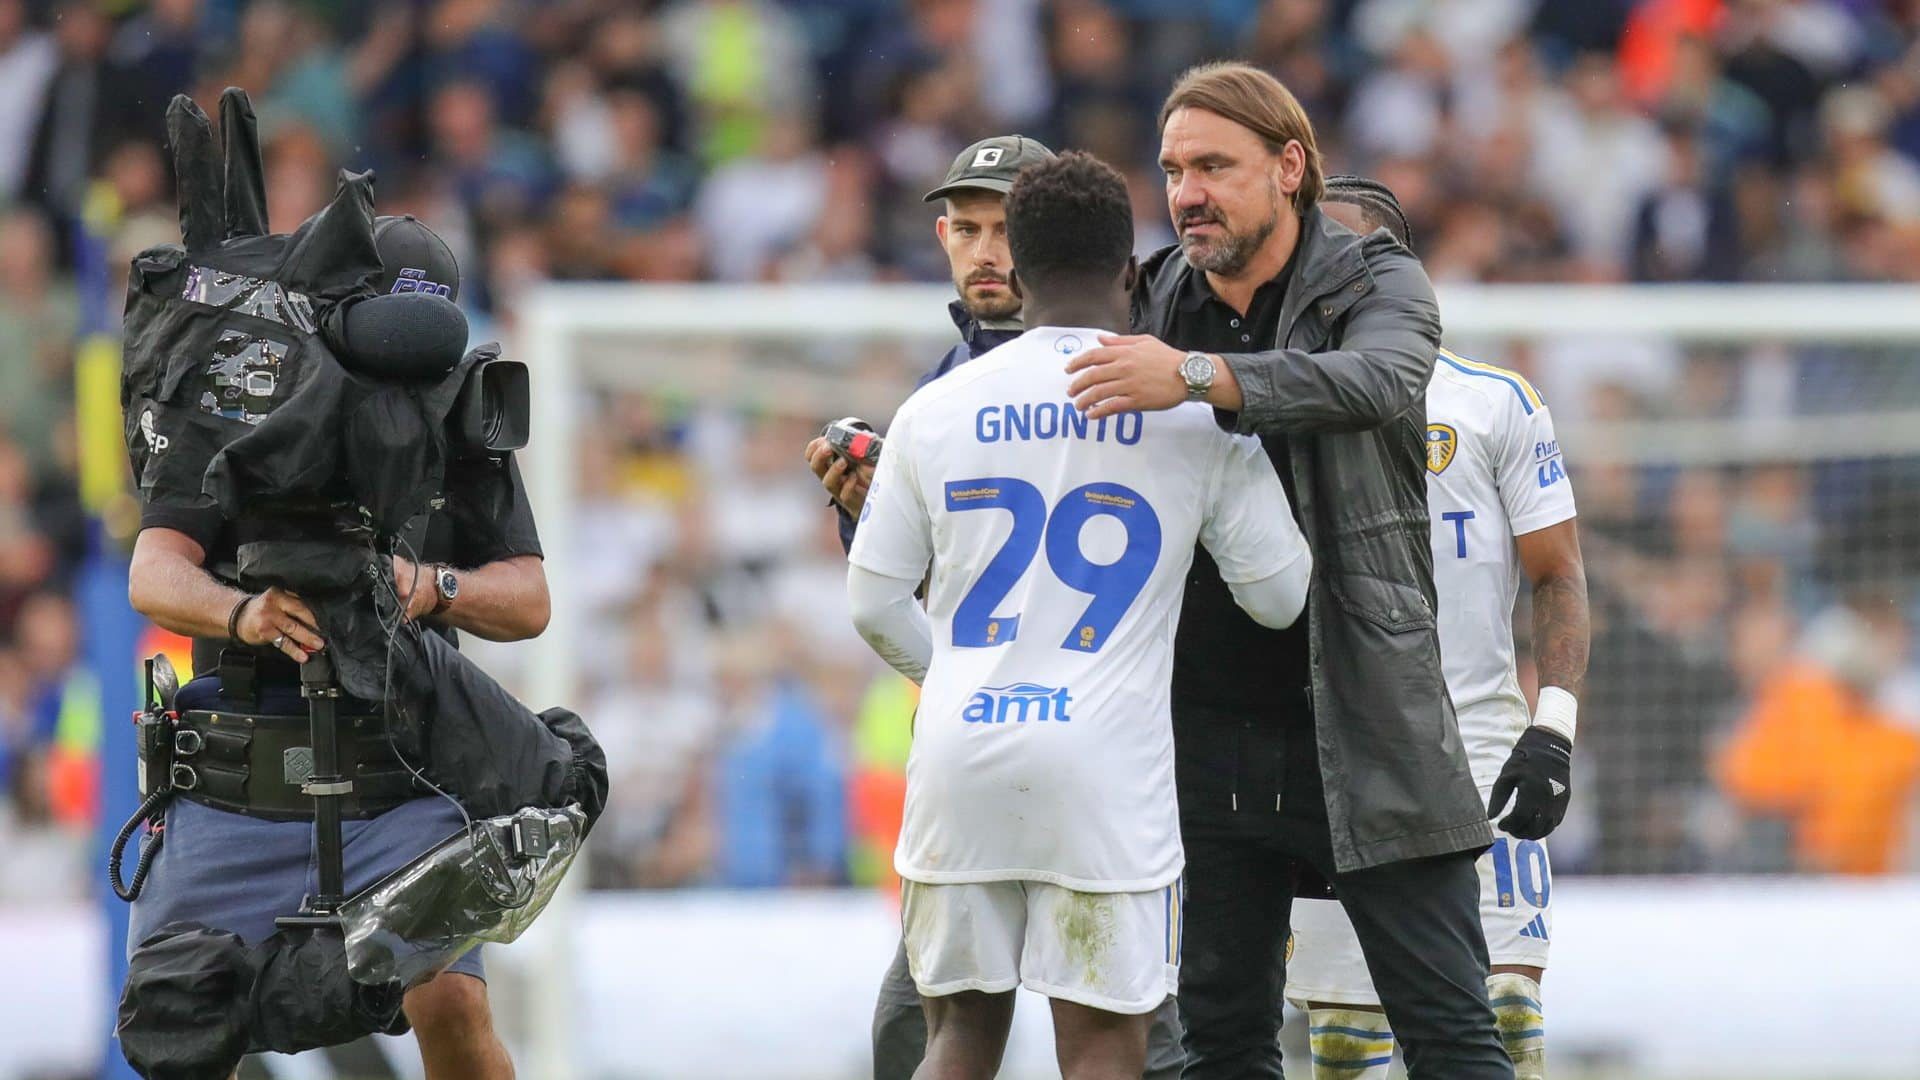 Daniel Farke moving to either hug Wilf Gnonto or strangle him, as a camera moves in from the side at the end of the Leeds vs Cardiff game